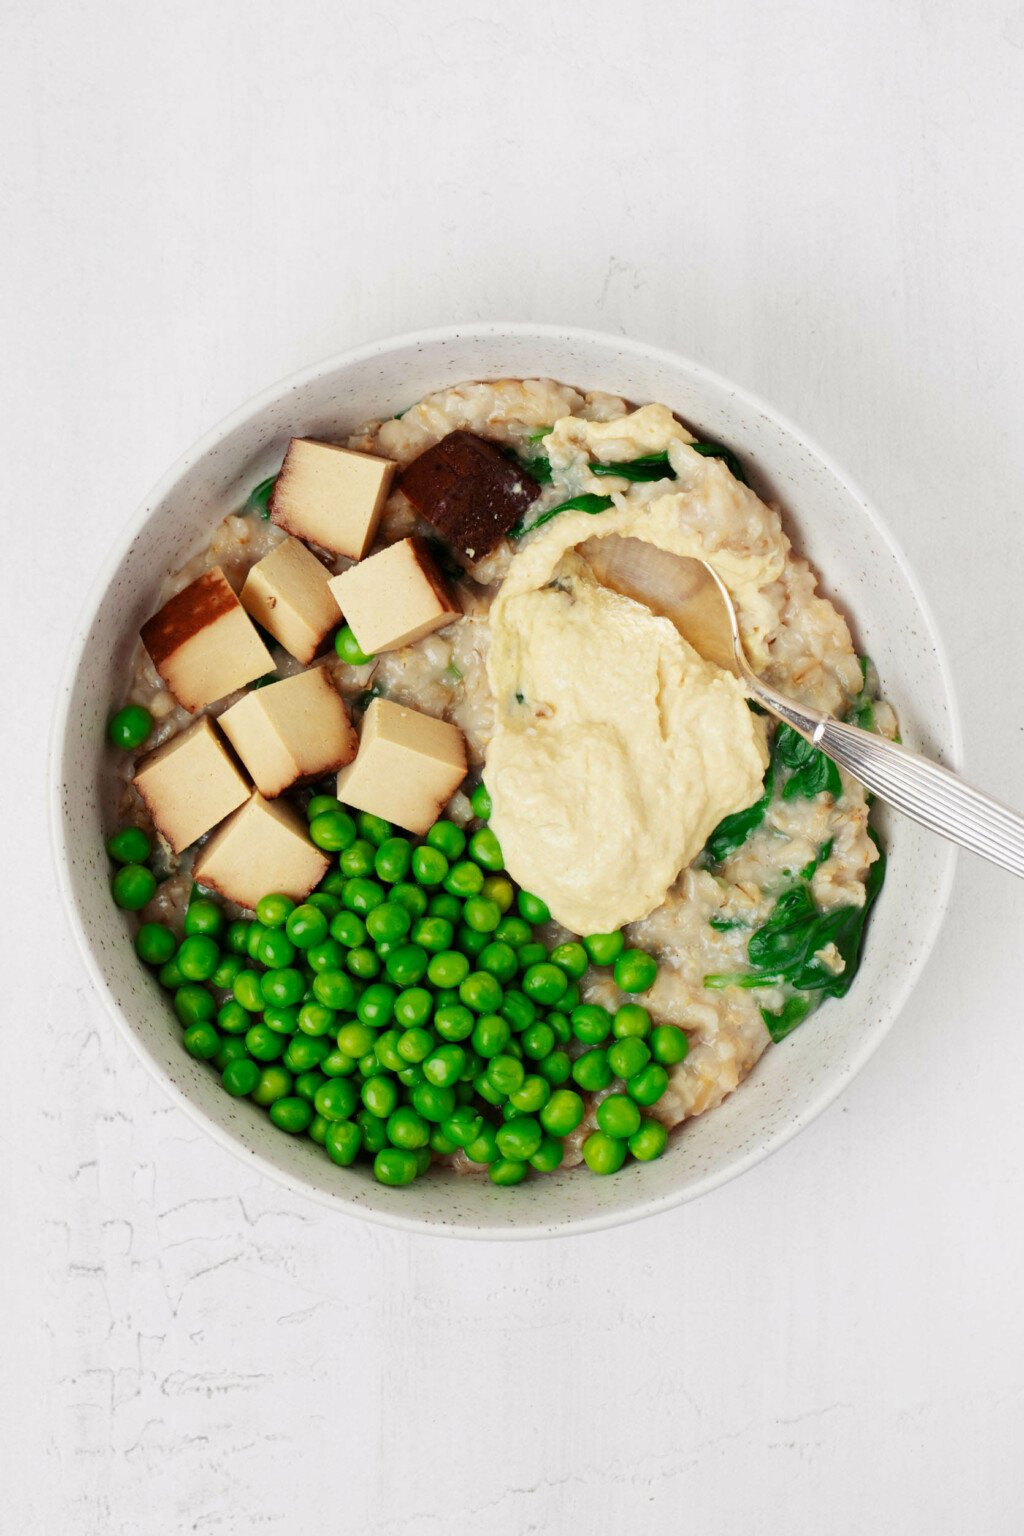 A round, white bowl rests on a white surface. The bowl is filled with plant-based ingredients and topped with a scoop of hummus.